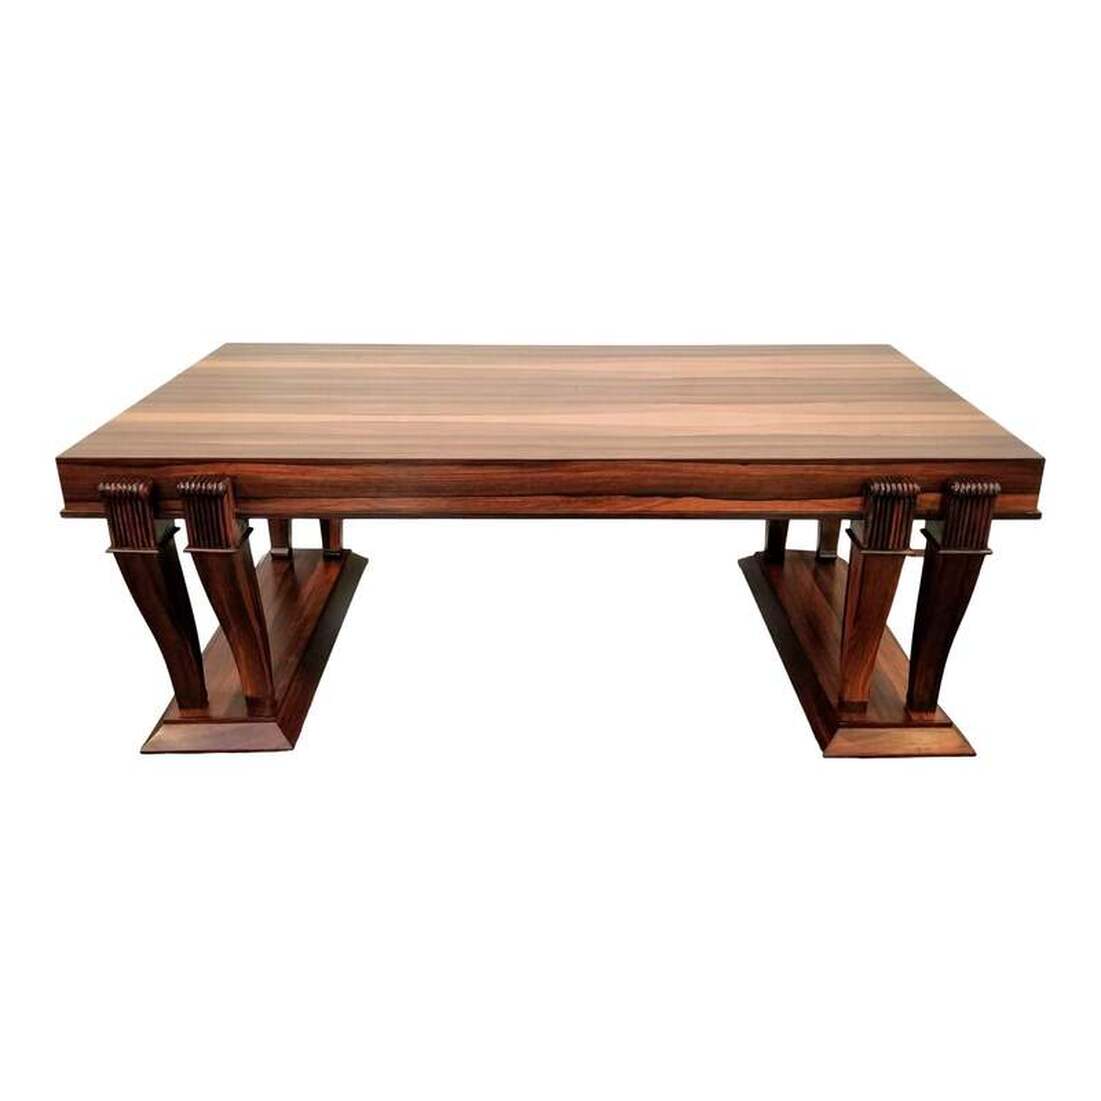 High-gloss finish Bolivian Rosewood ( Machearium Villosum ) rectangular coffee table in a Traditional design with eight reeded top sabre legs on two trestle bases.  Table will complement interiors incorporating style elements such as English Regency, Hepplewhite, Sheraton, Georgian, British-Raj, British Colonial, Art Deco, Art Moderne, Empire, and Duncan Phyfe.  SIZE:  48